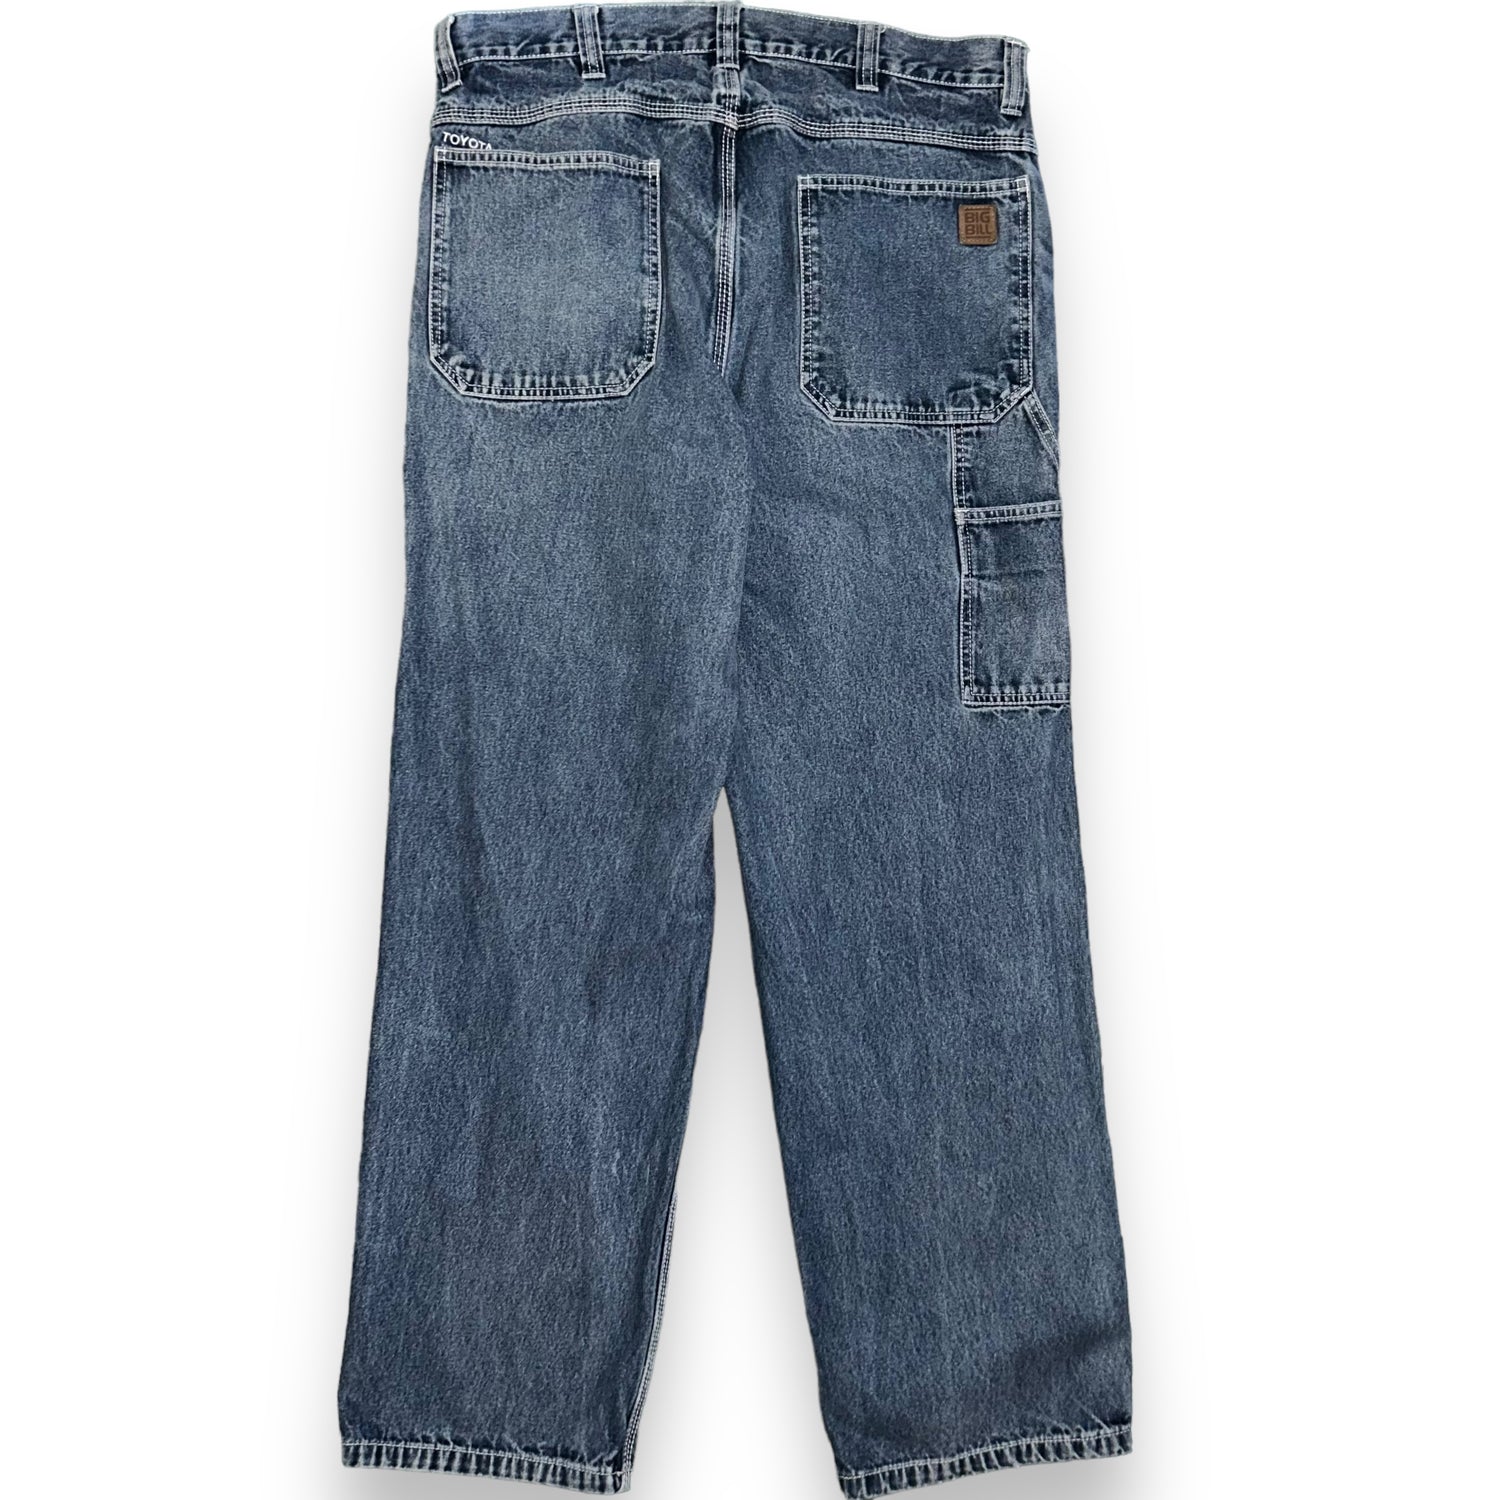 Baggy Jeans  (34 USA  L)